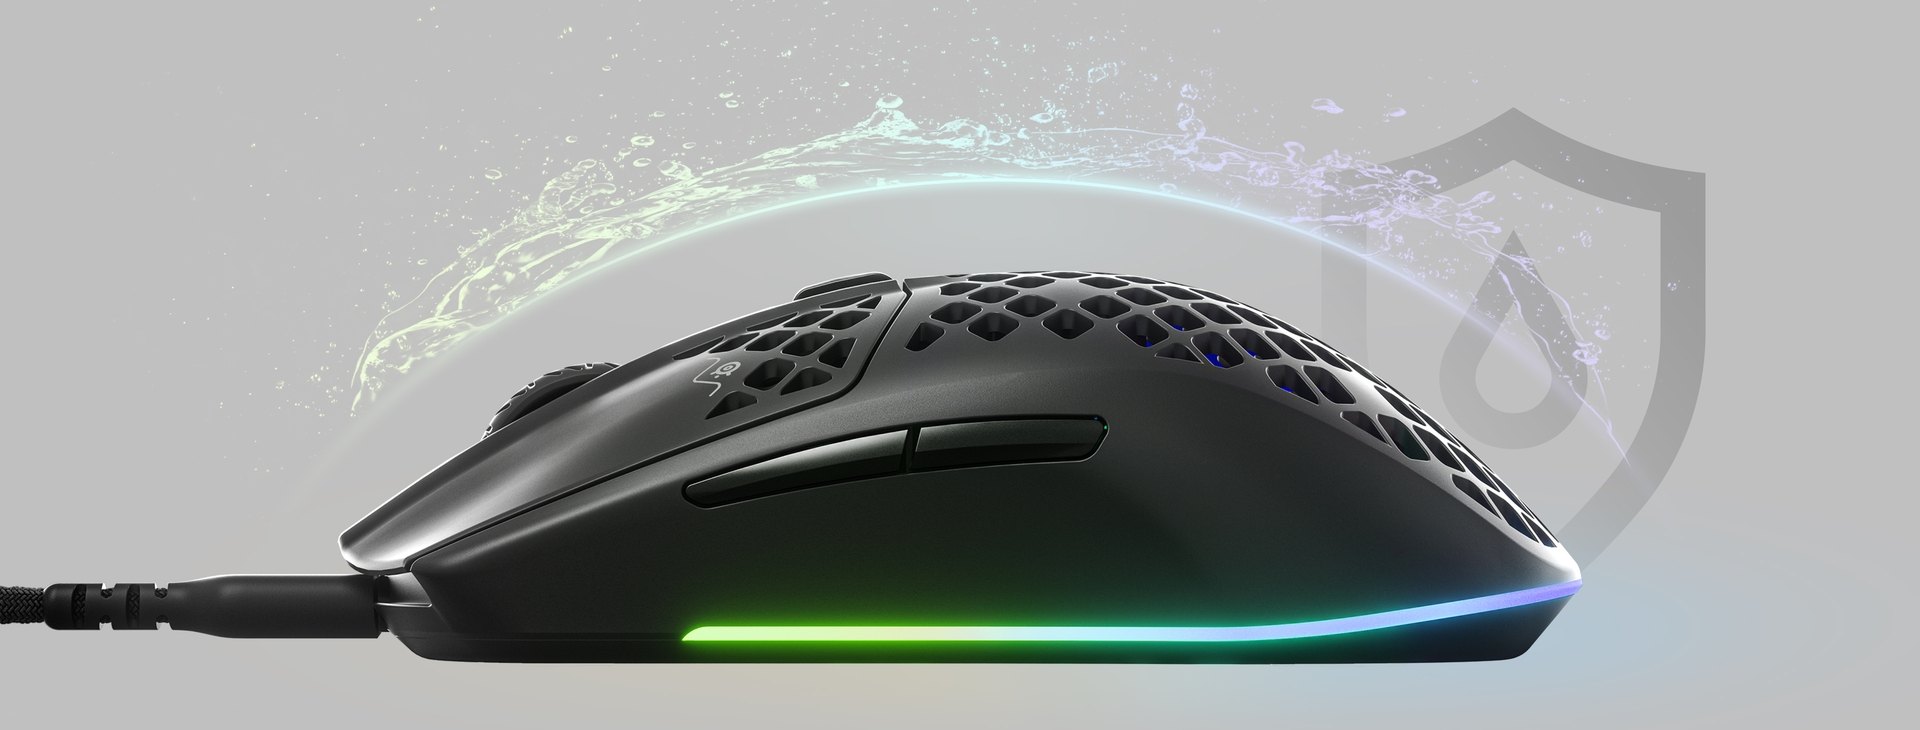 An Aerox 3 mouse with an invisible shield protecting it from incoming water splashing, to convey the waterproofing features.